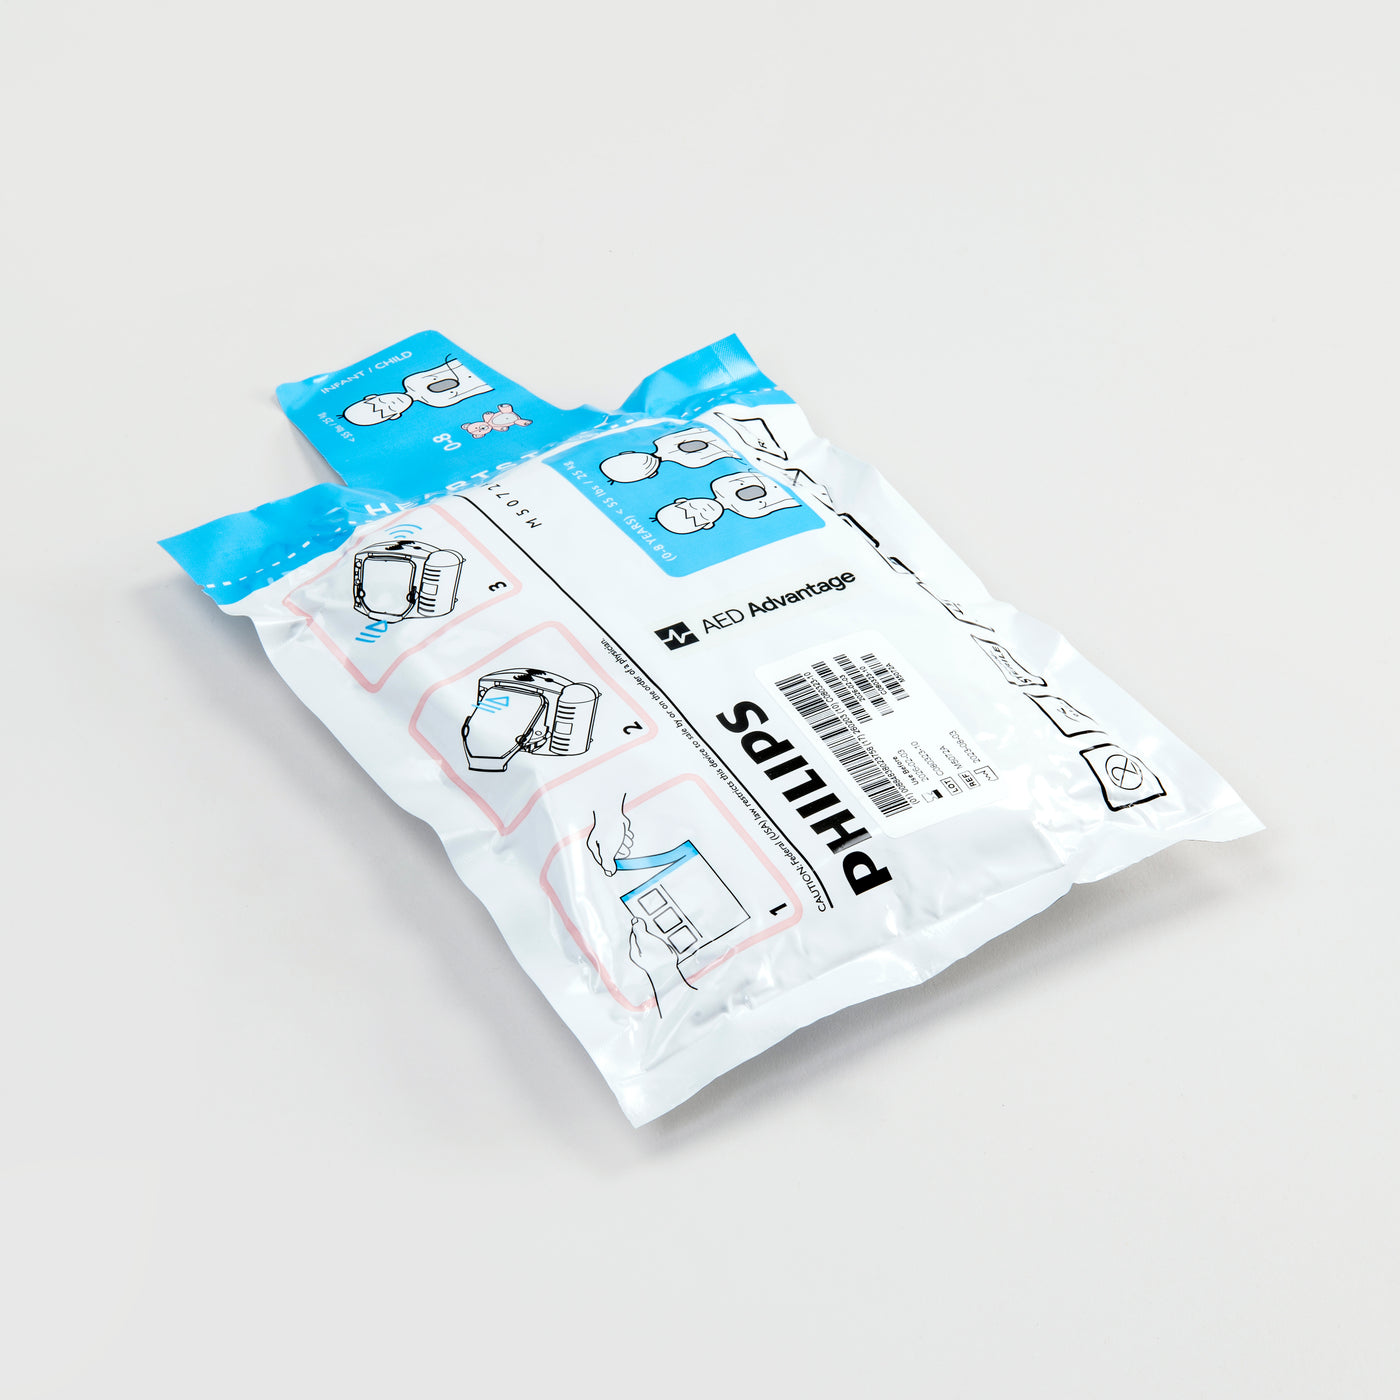 A white and blue rectangular foil package containing pediatric electrodes for the Philips OnSite Defibrillator